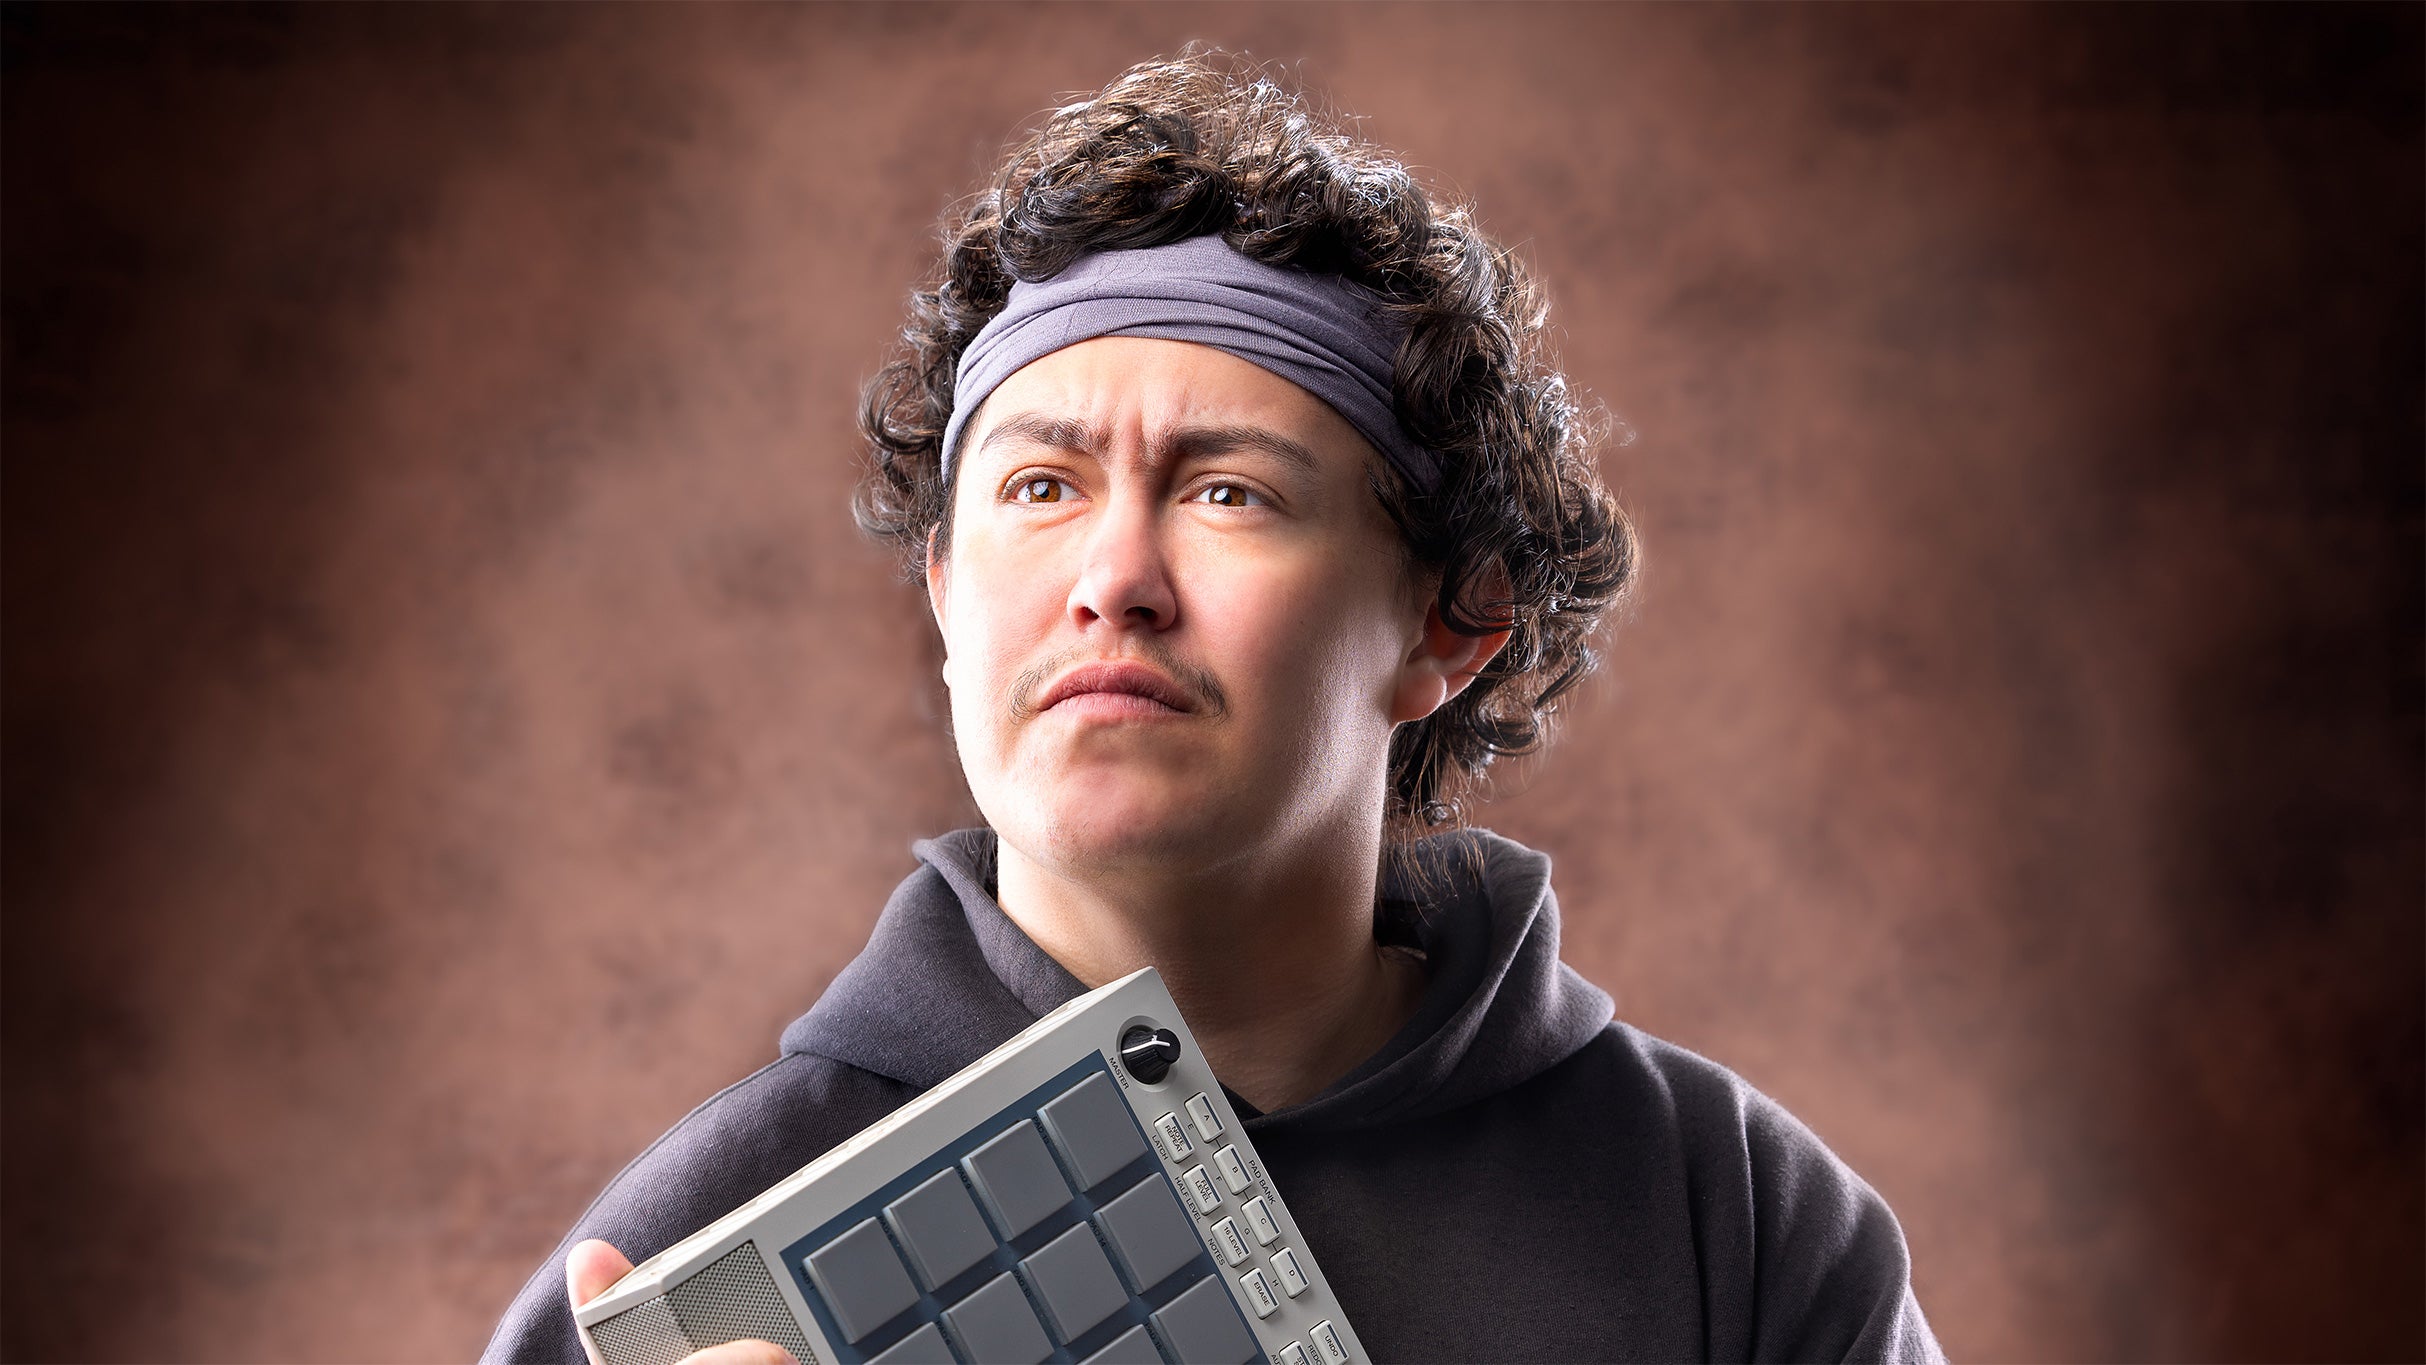 Hobo Johnson Loves the West Coast @ 191 Toole pre-sale code for legit tickets in Tucson